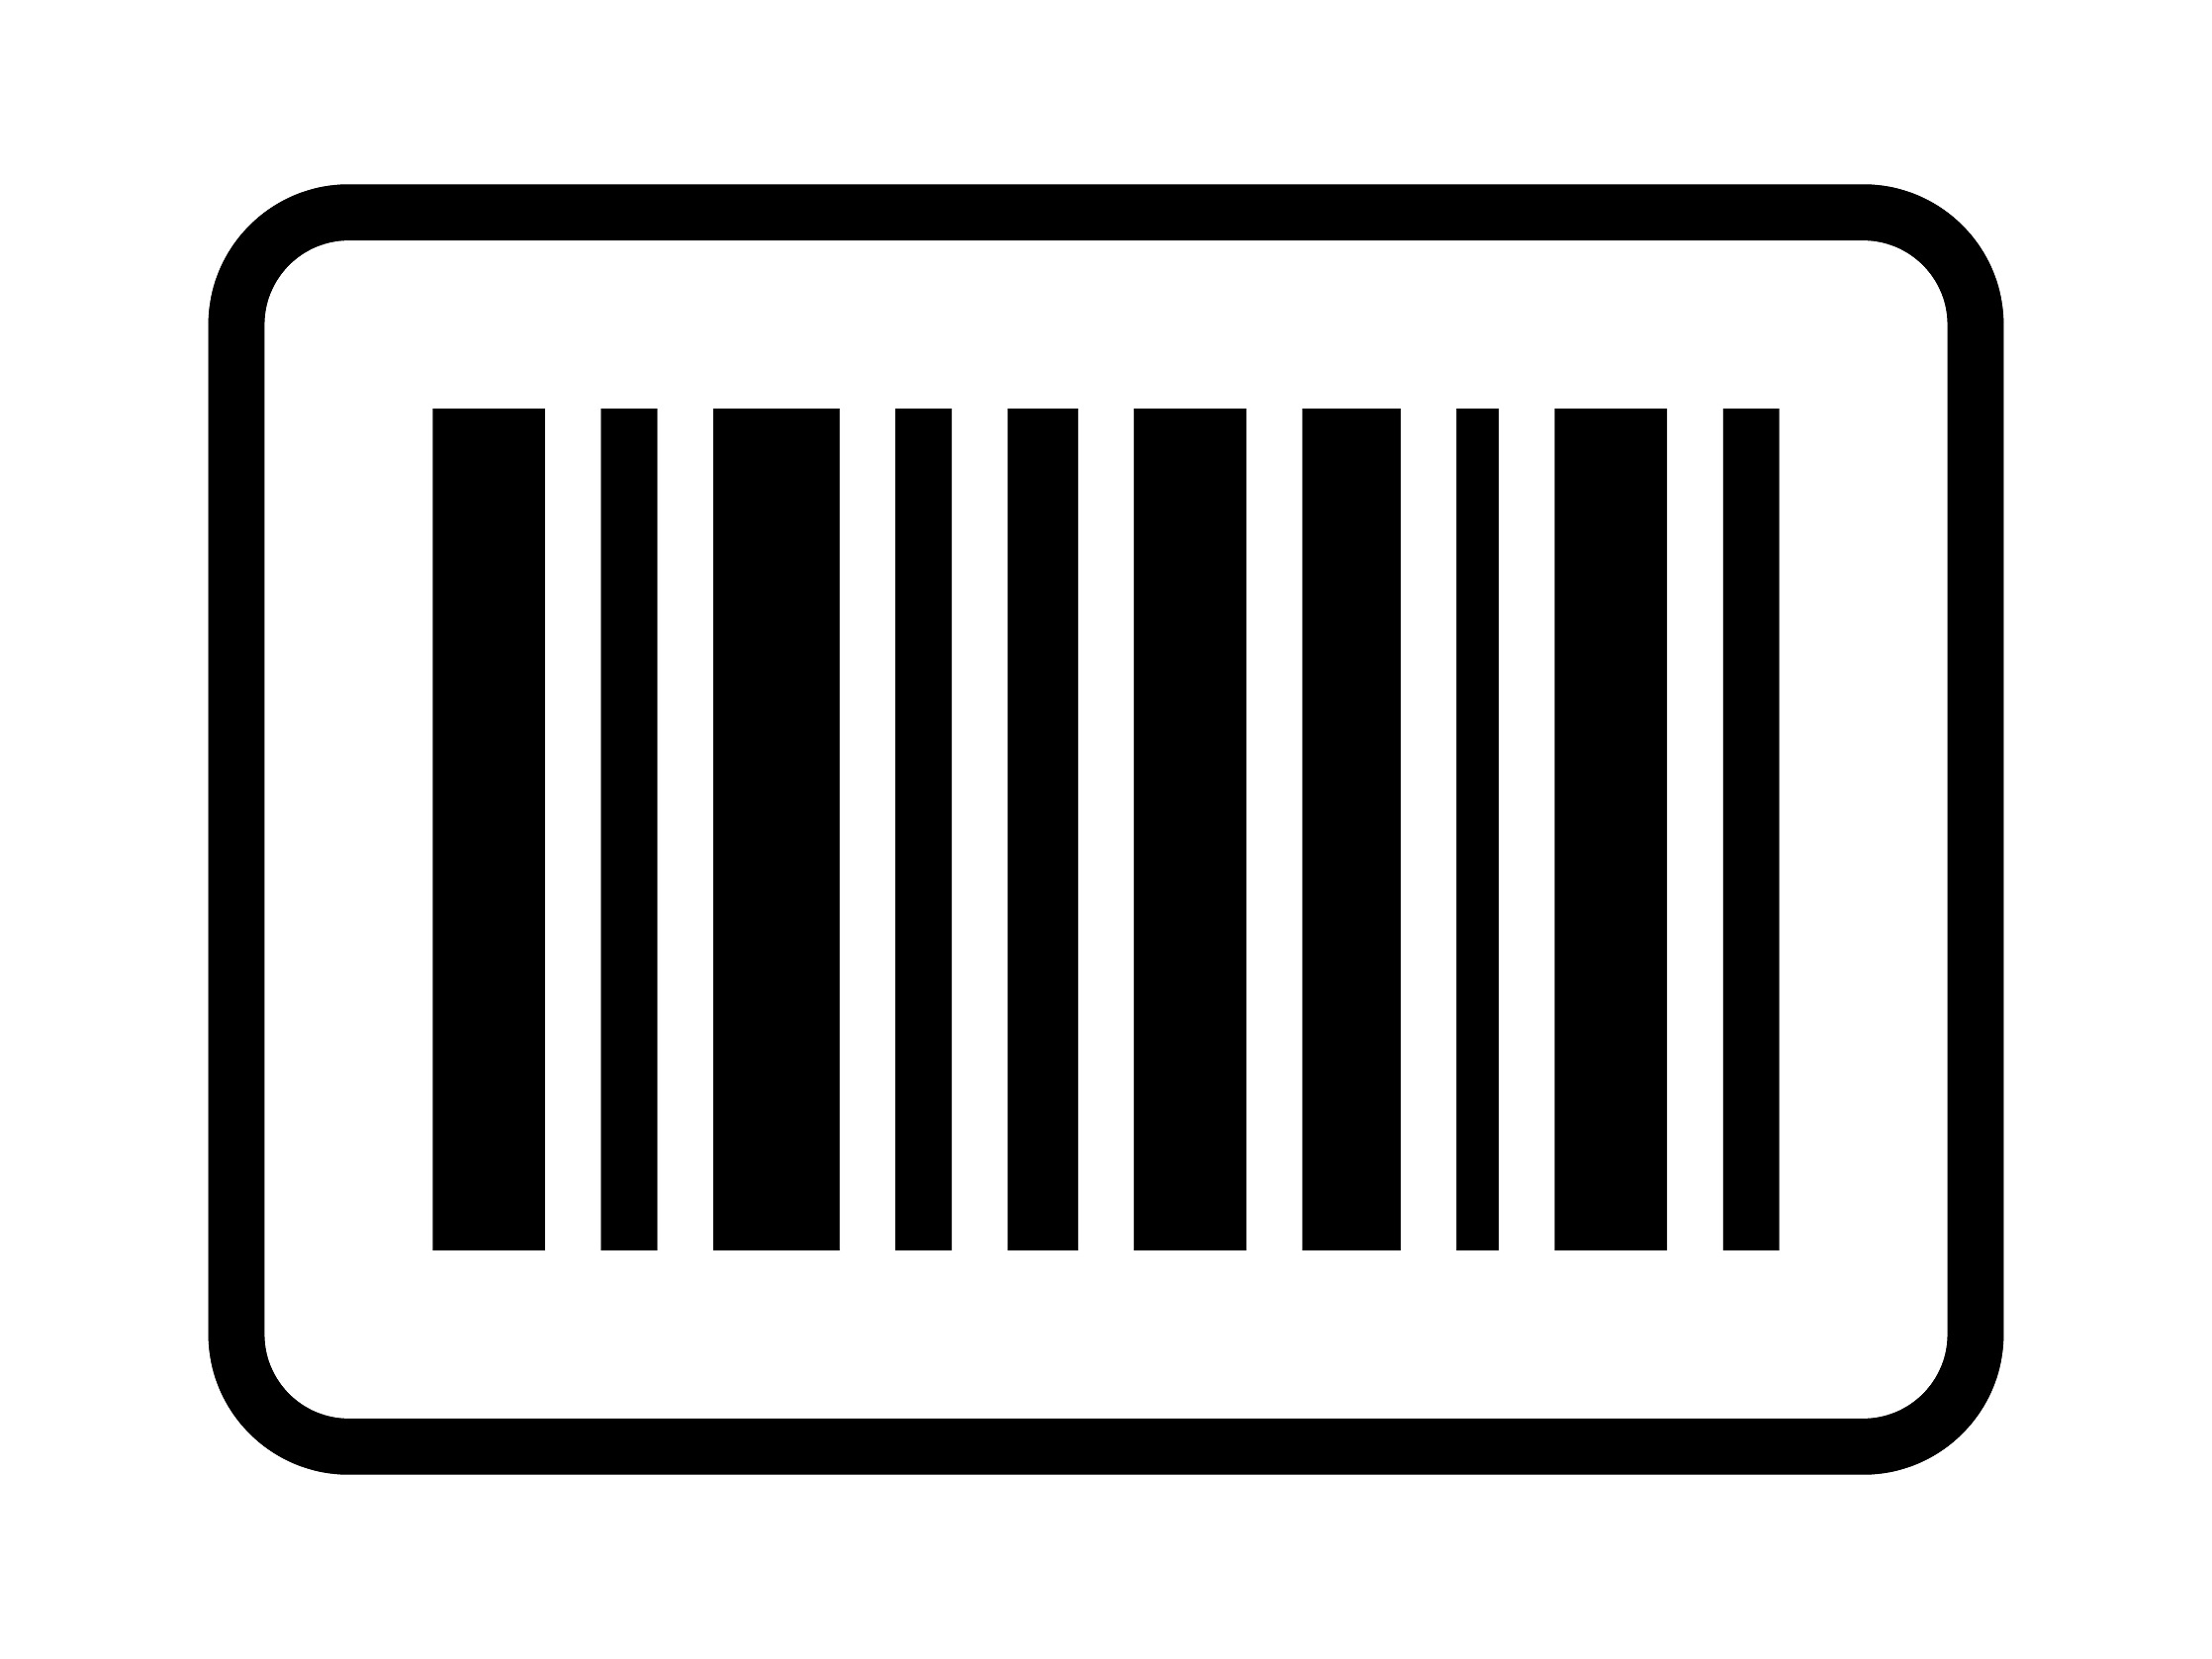 Honeywell Files Complaint Against Code Corp. Over Barcode Scanning Patent Infringement